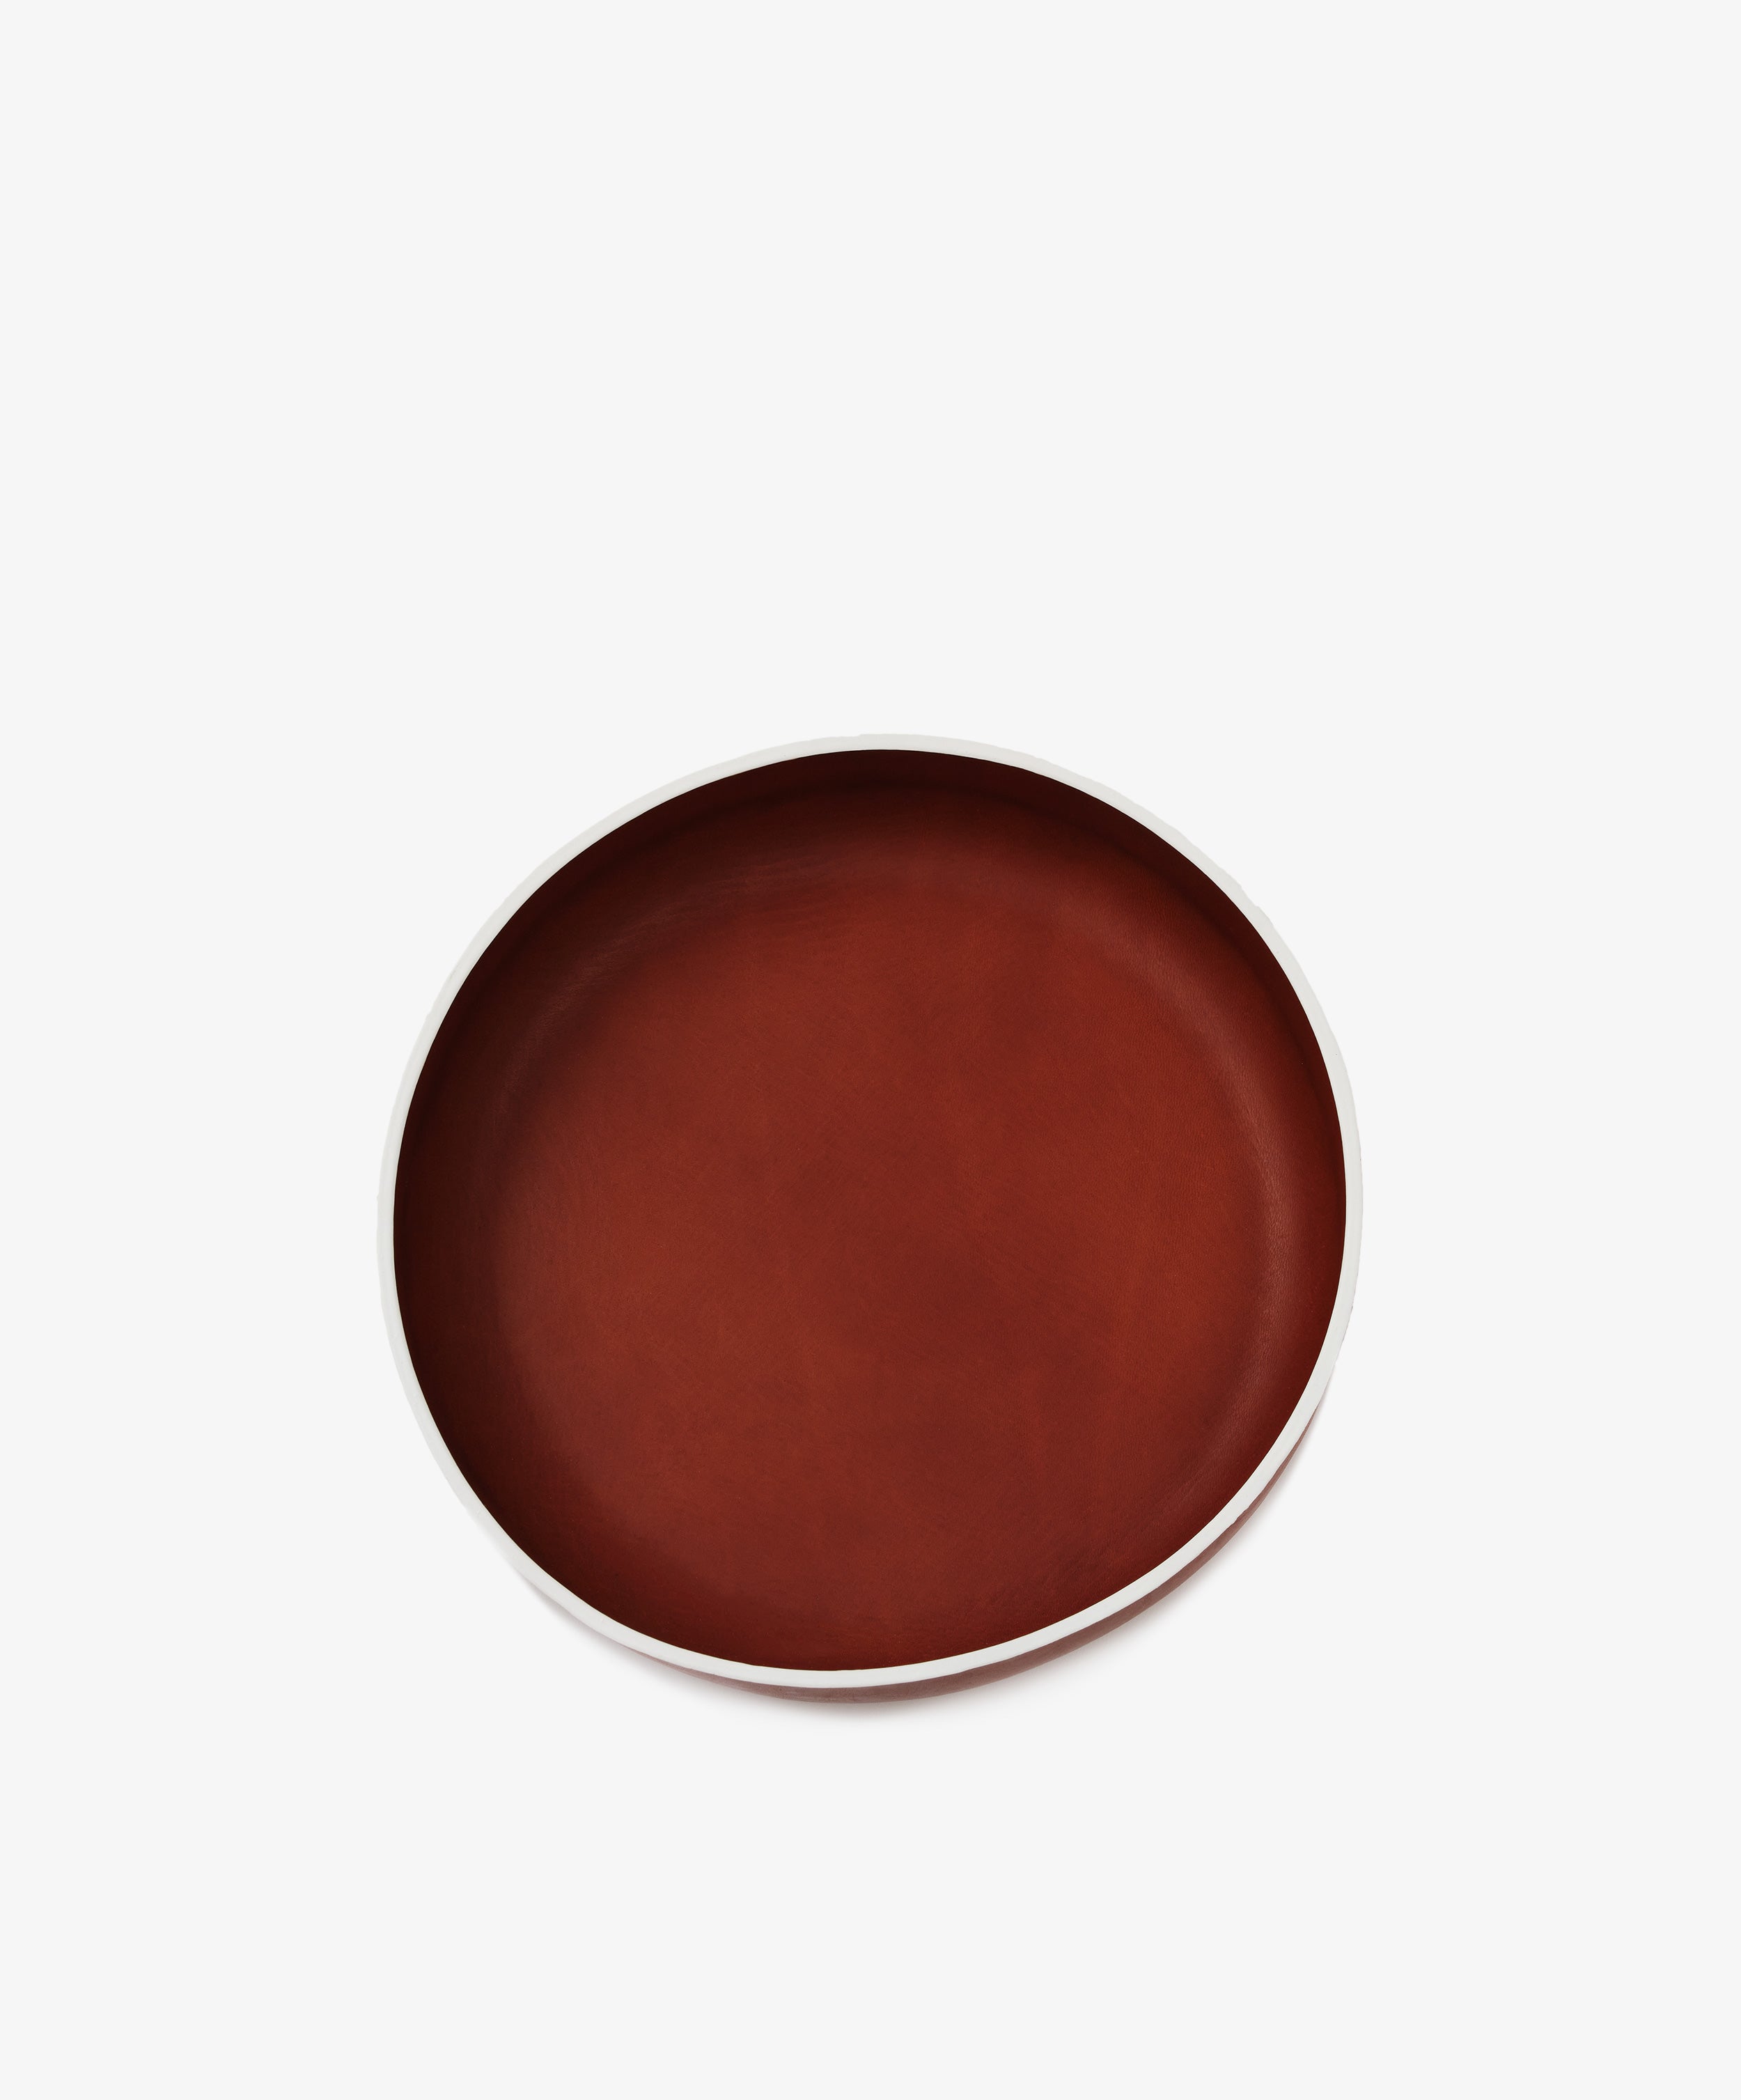 Leather Round Bowl with Painted Rim, XXL